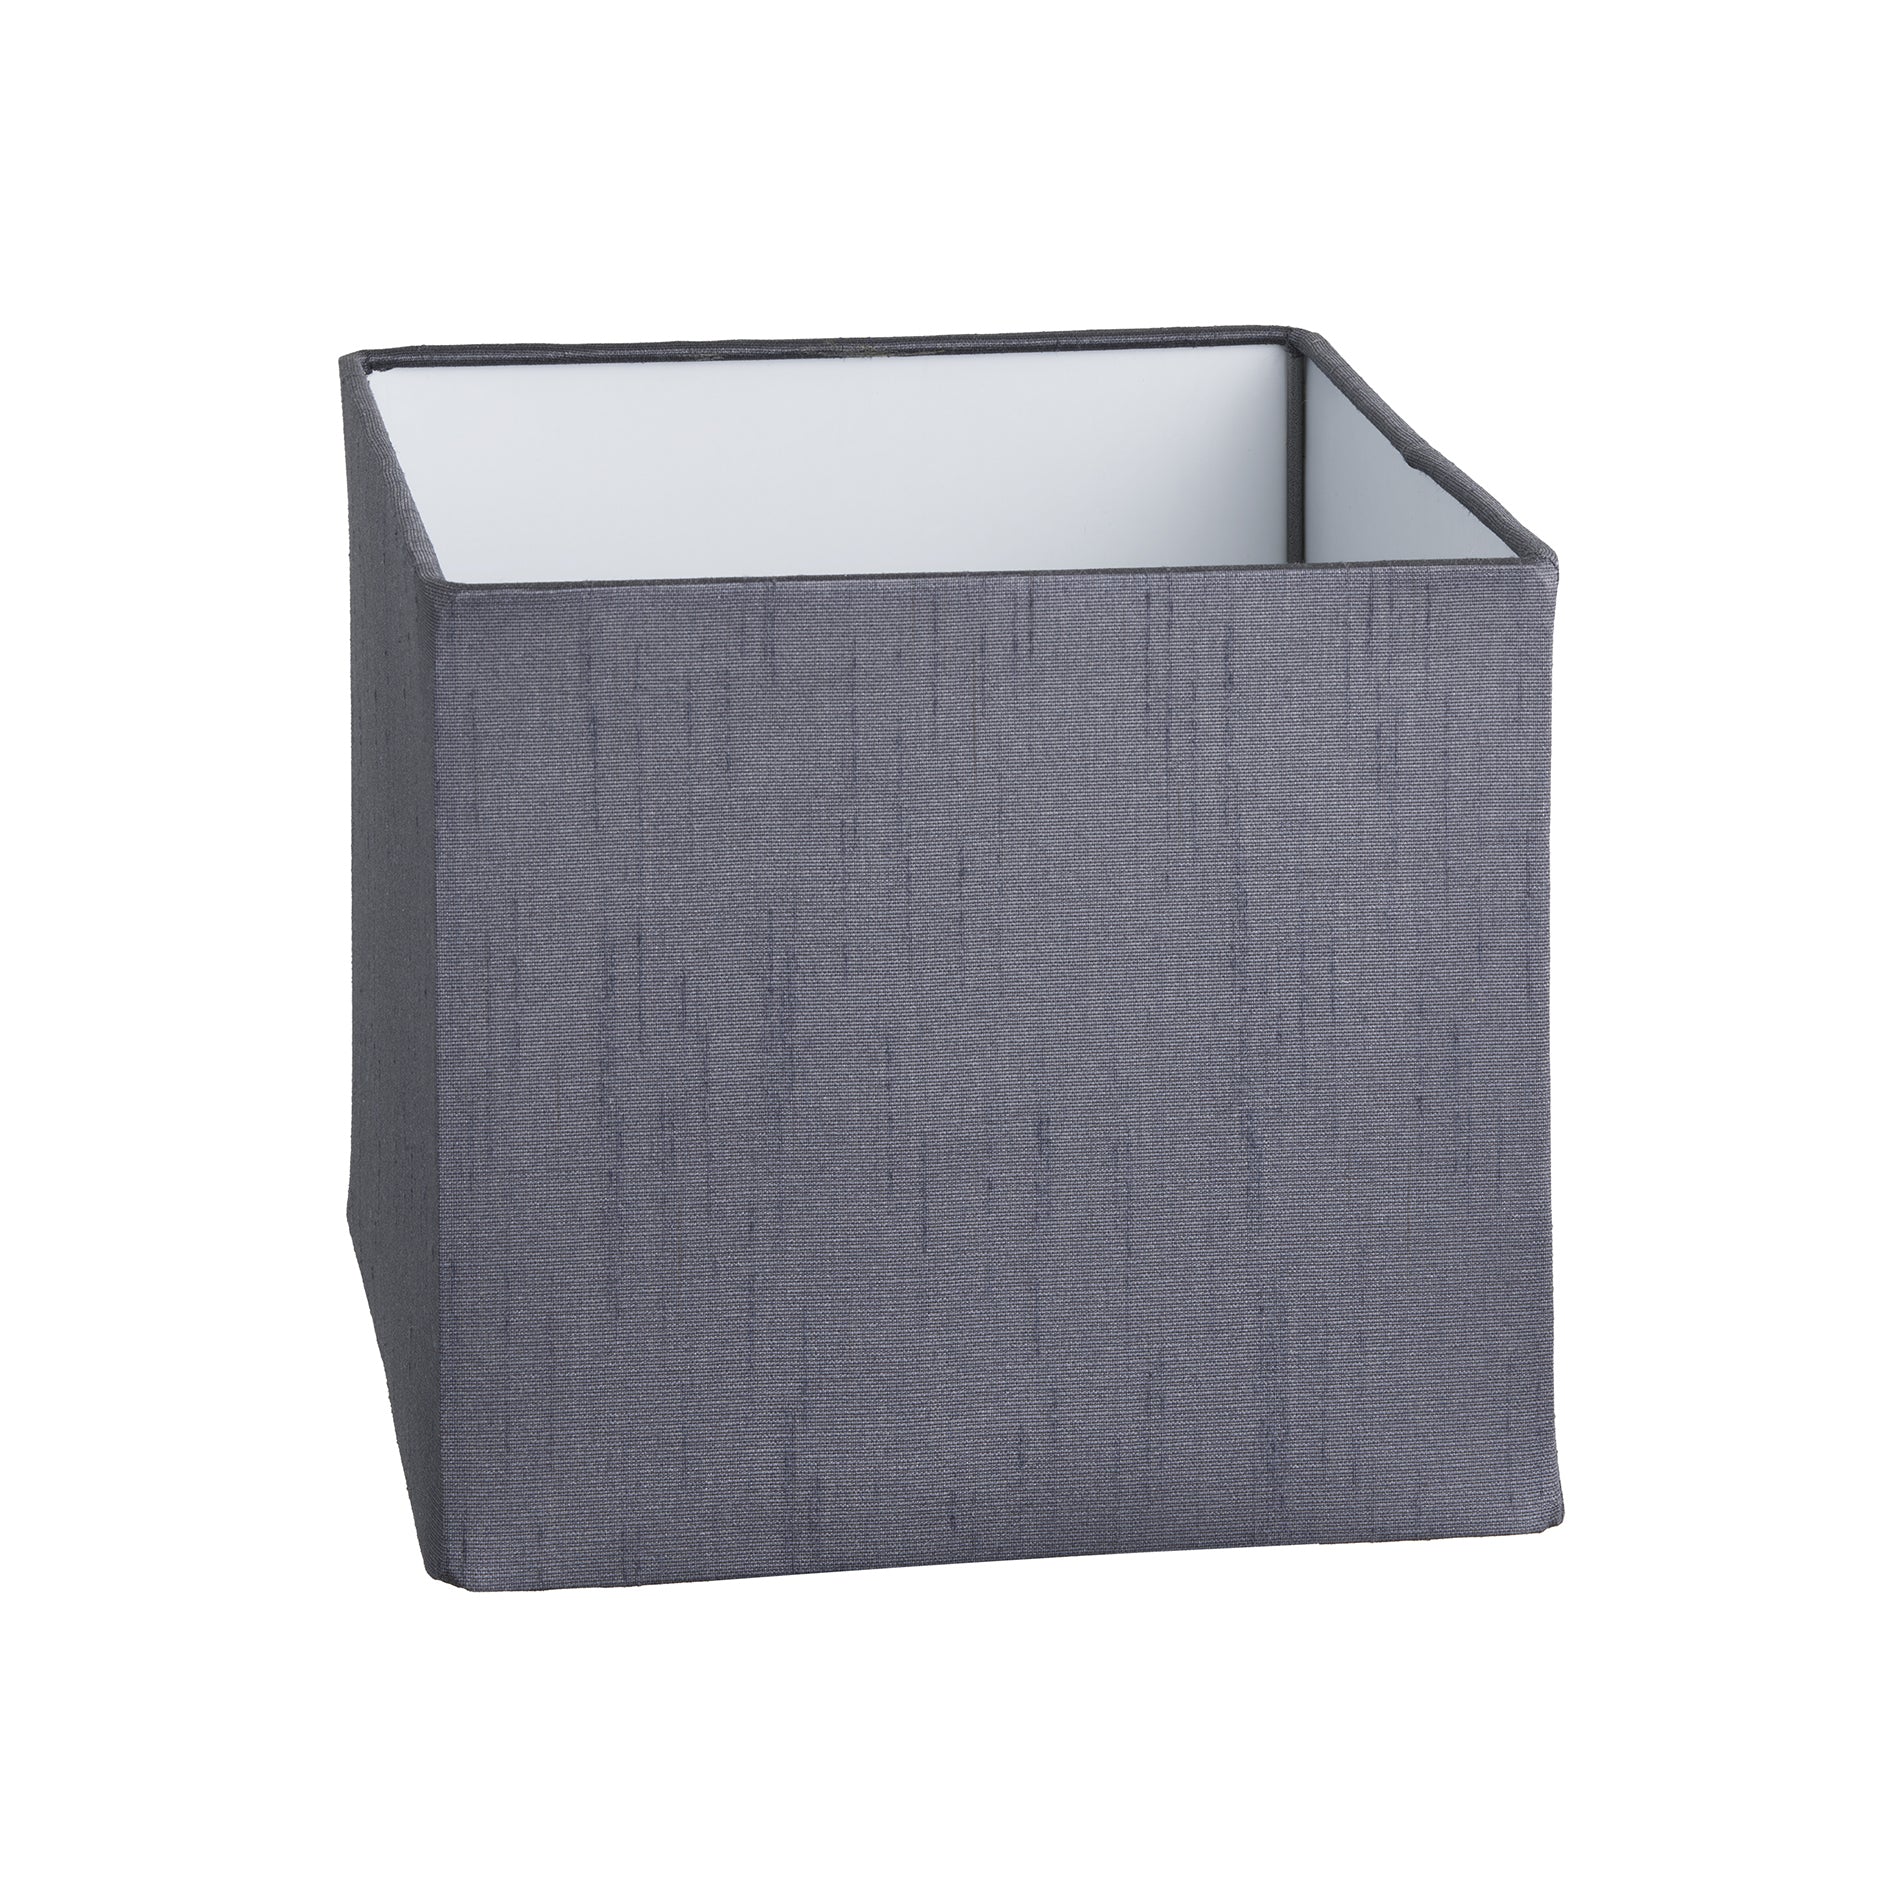 Cube - Small - Grey Dupion Silk - Lampshade Only Industville CU-S-GRDS-LSO